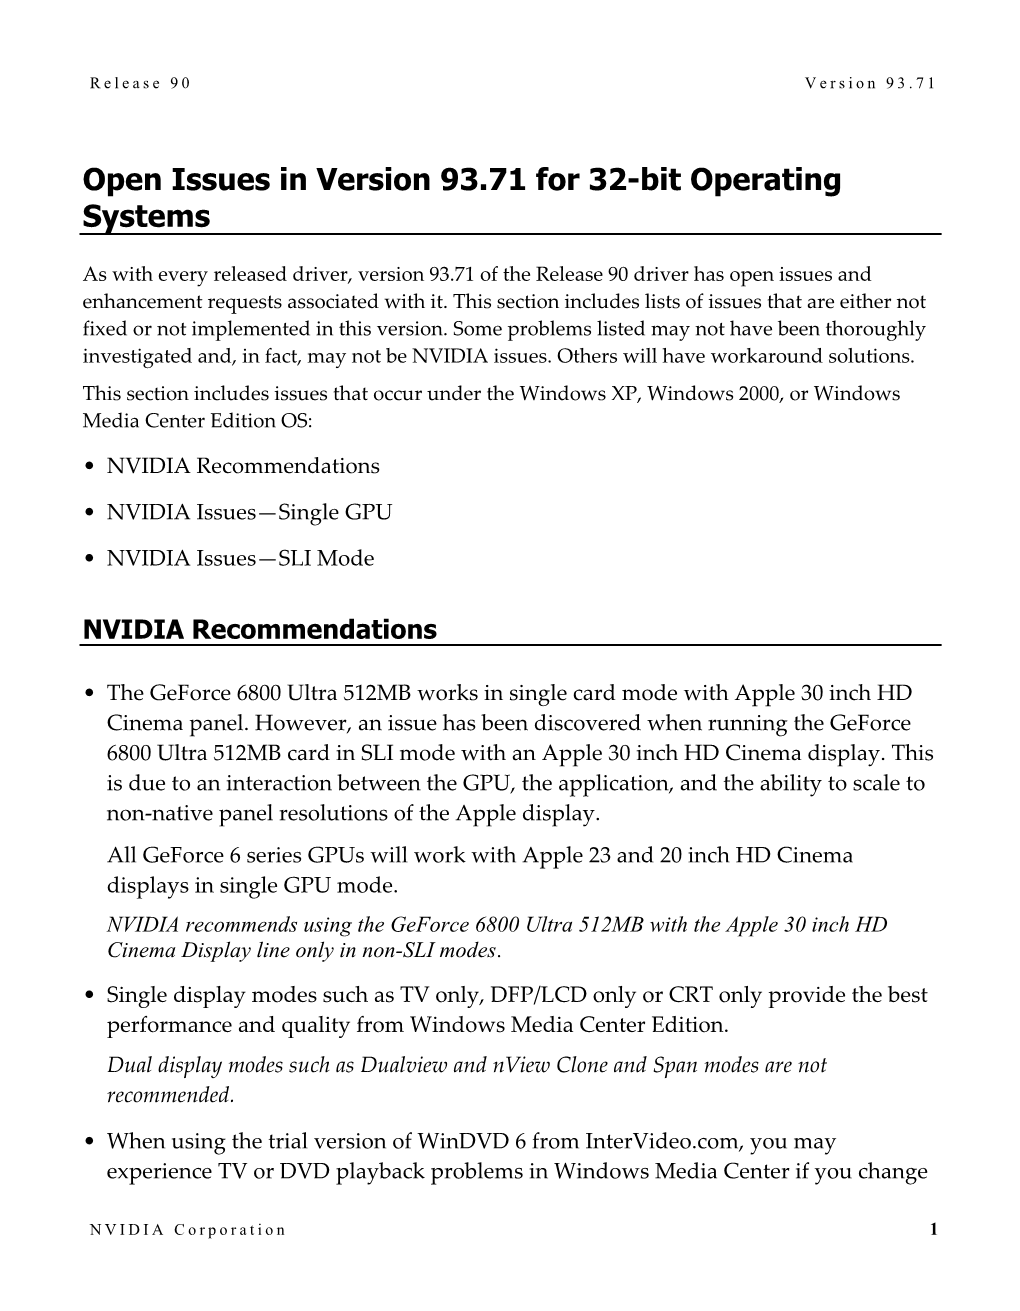 Open Issues in Version 93.71 for 32-Bit Operating Systems